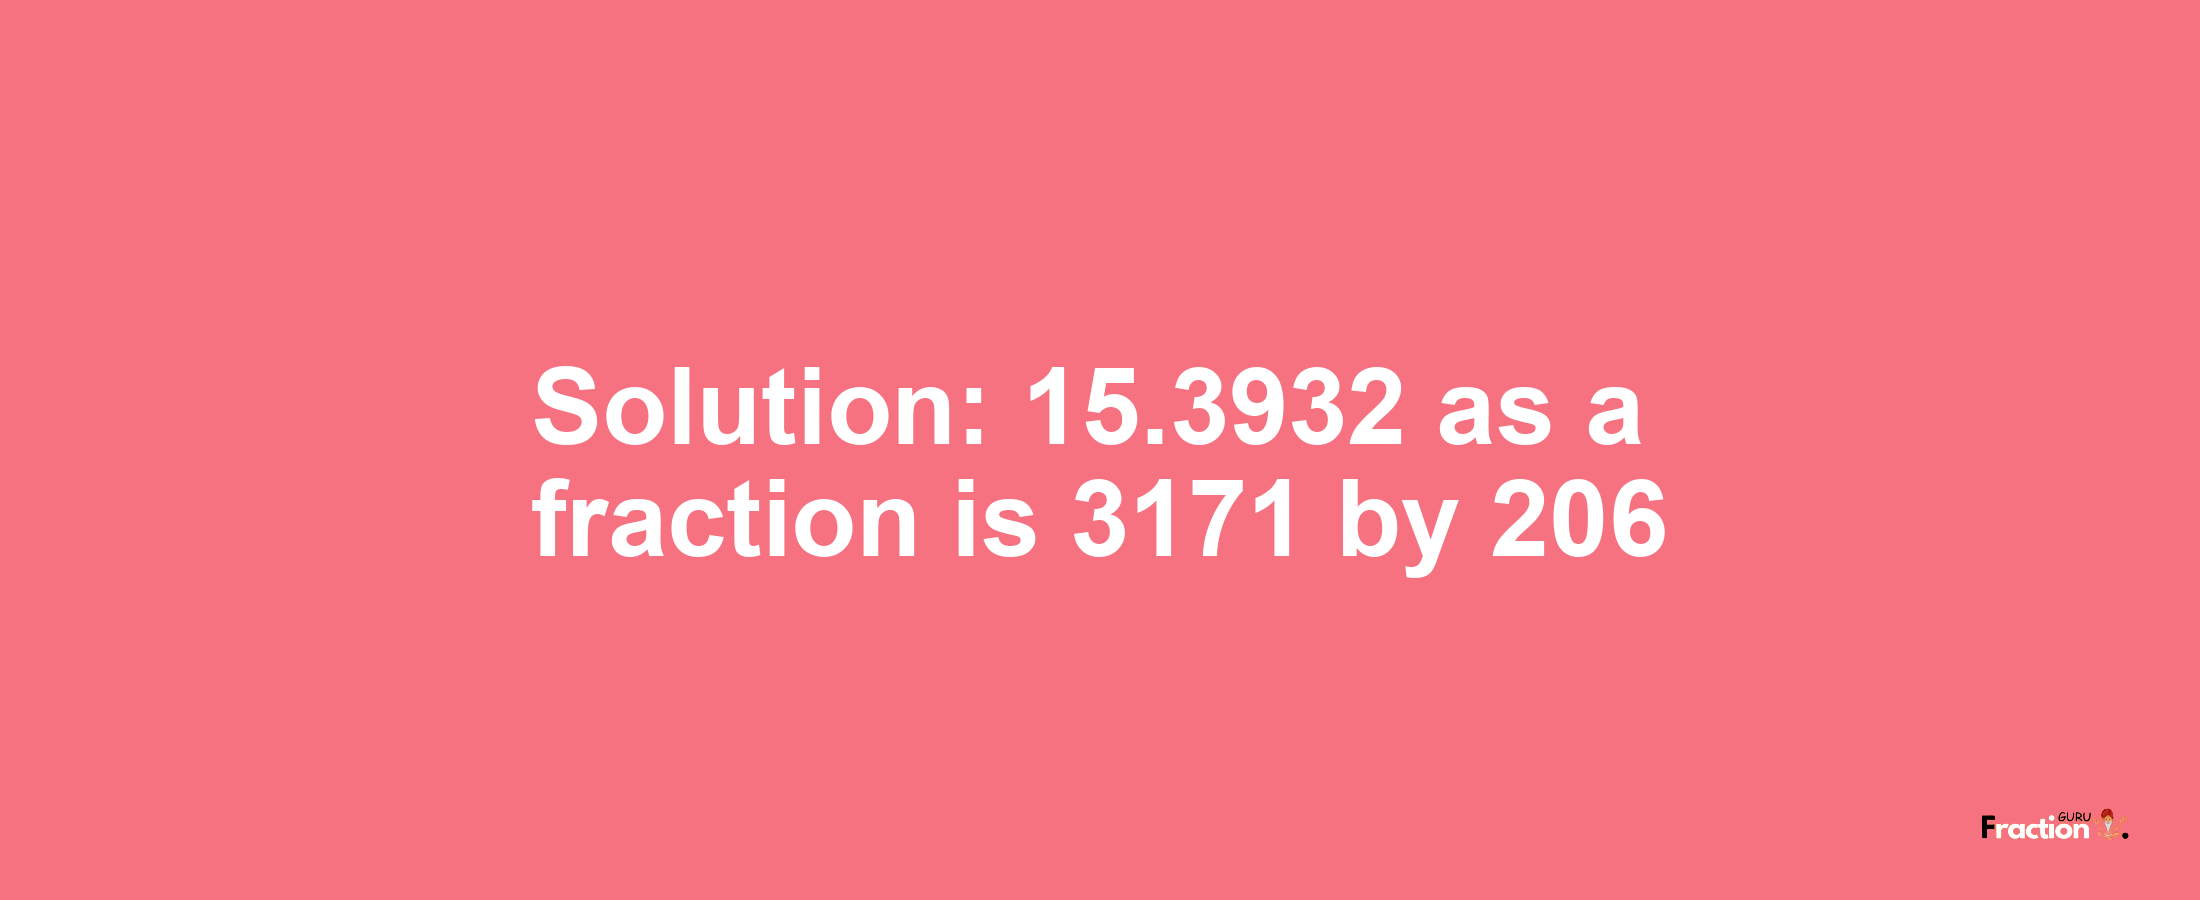 Solution:15.3932 as a fraction is 3171/206